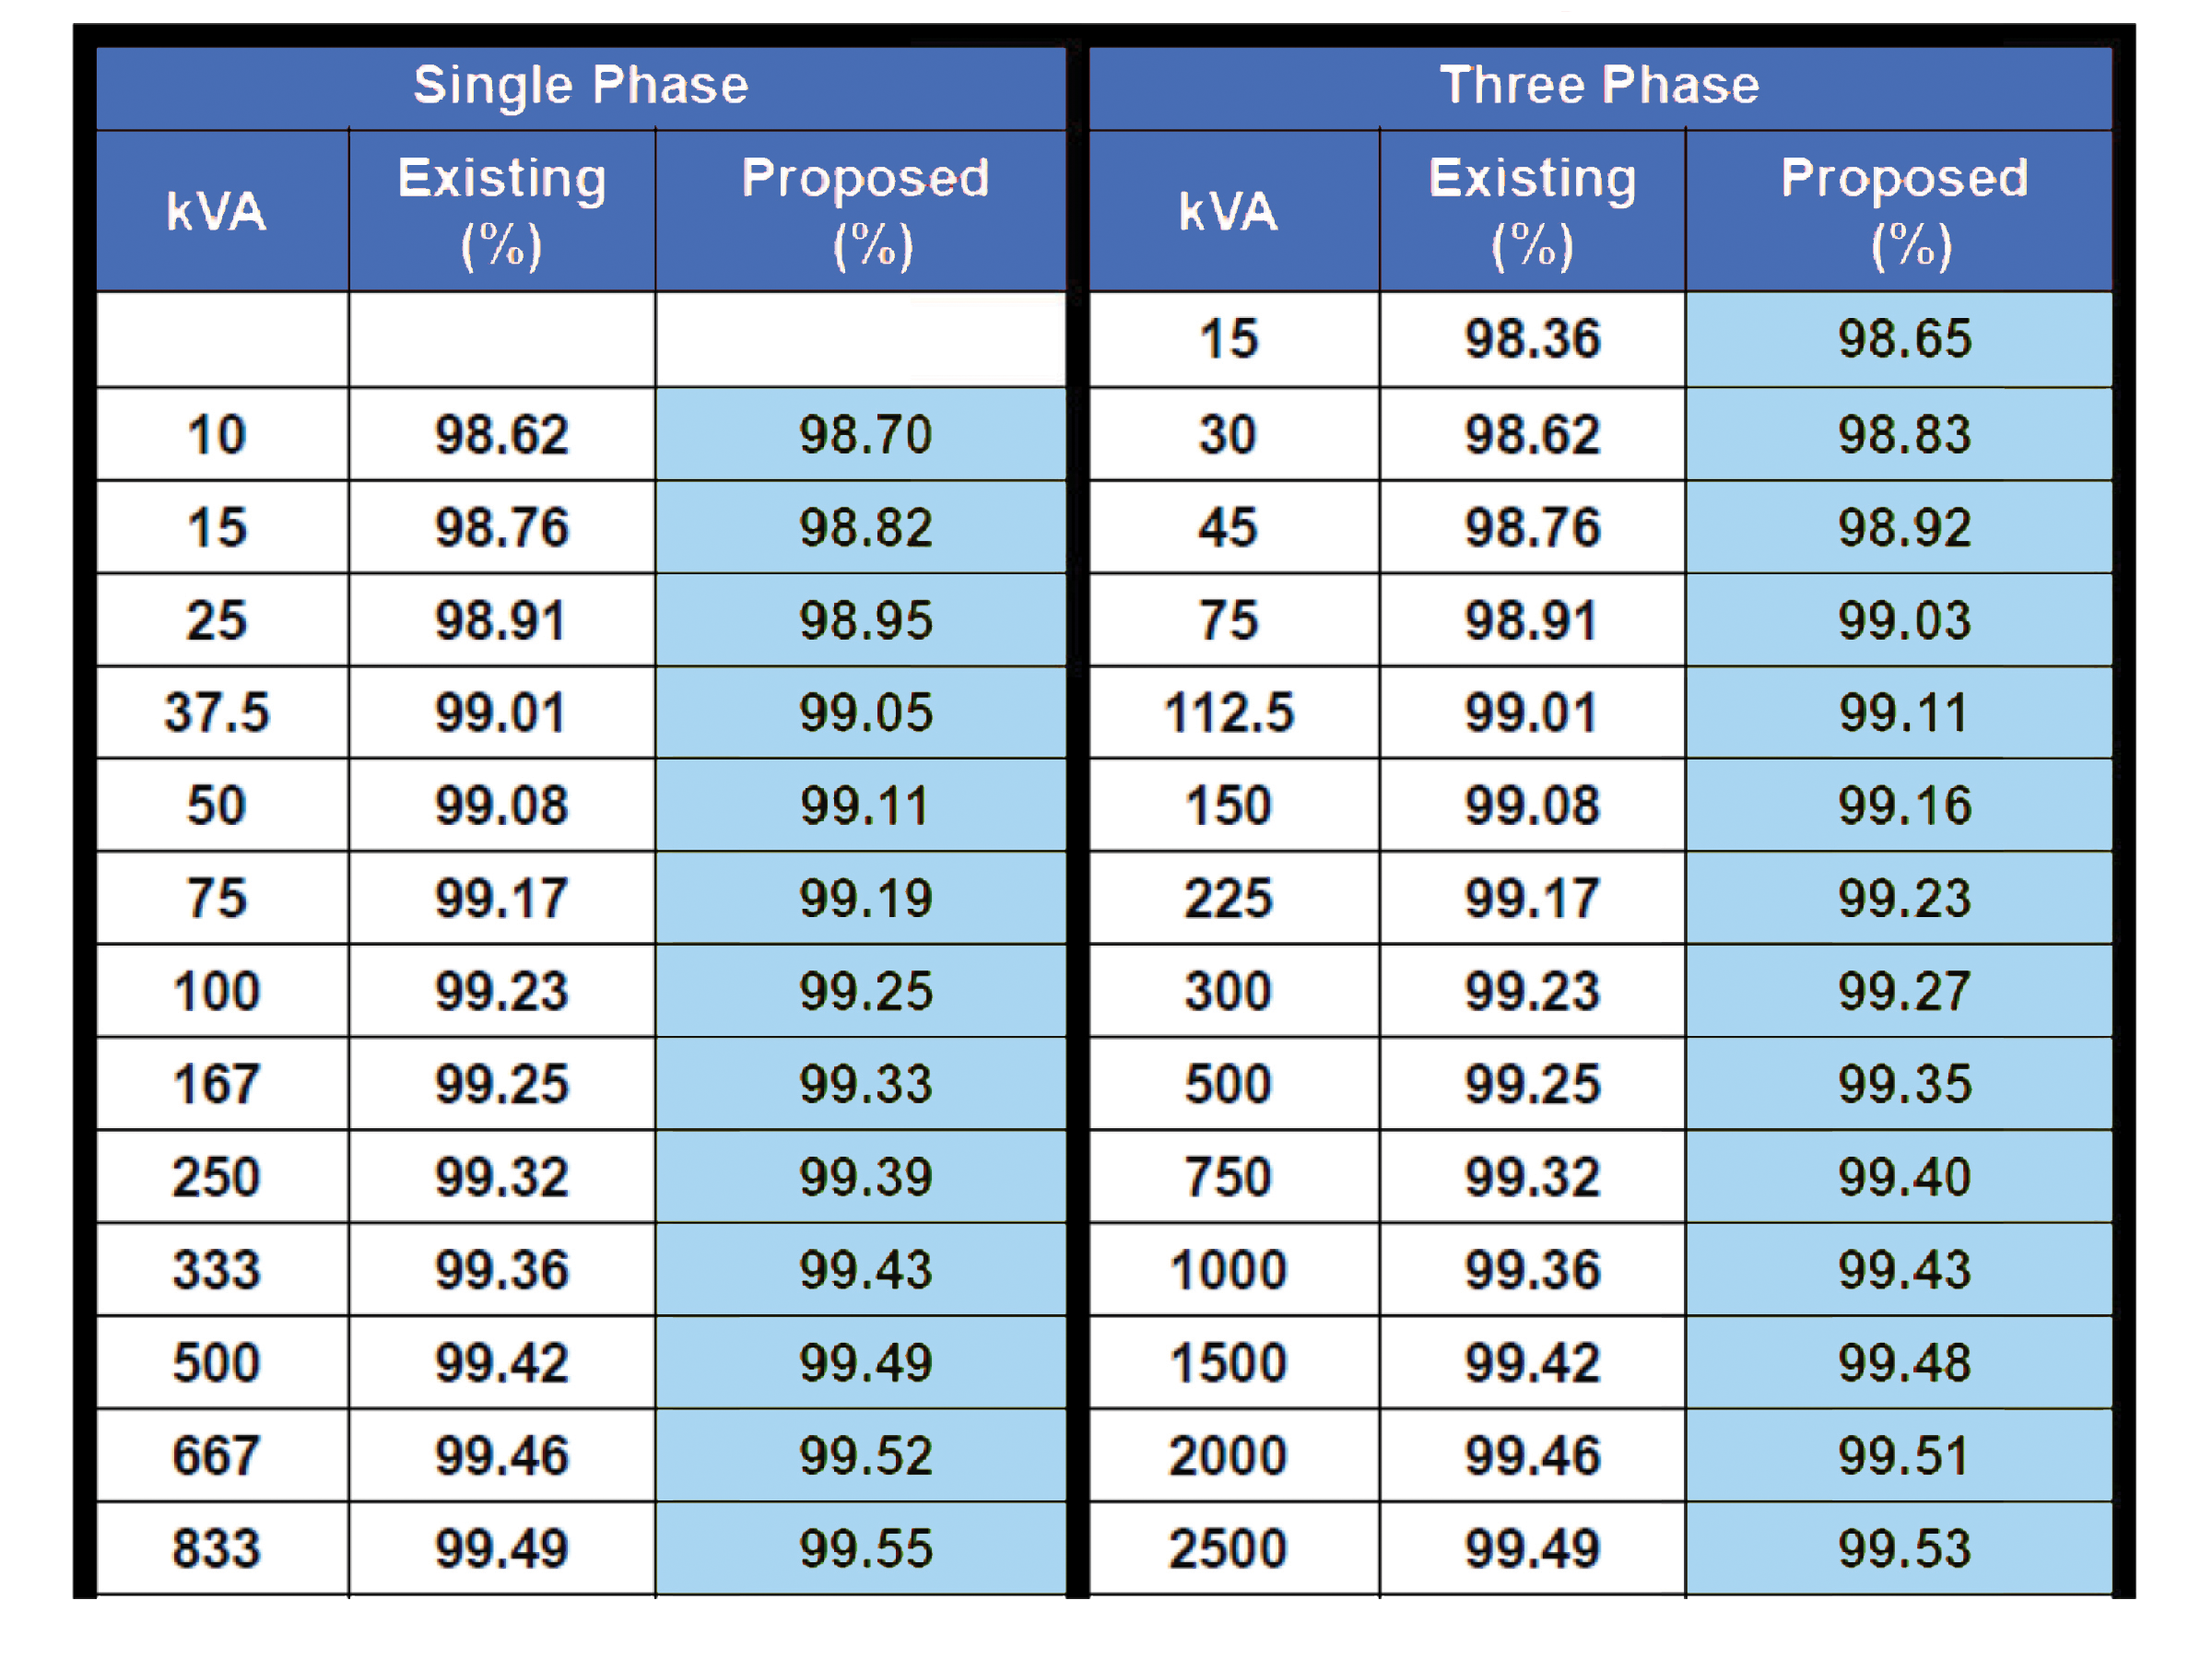 3-phase-transformer-sizing-chart-best-picture-of-chart-anyimage-org